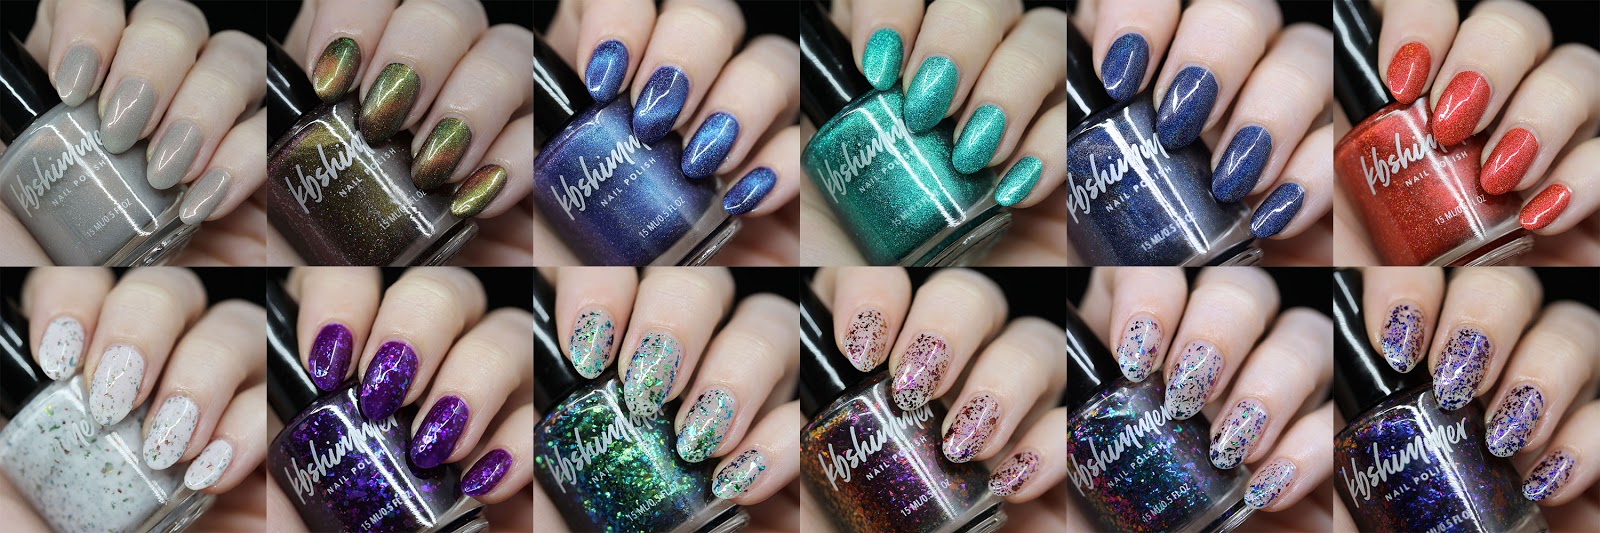 Kbshimmer Winter 2018 Collection Swatches And Review The Daily